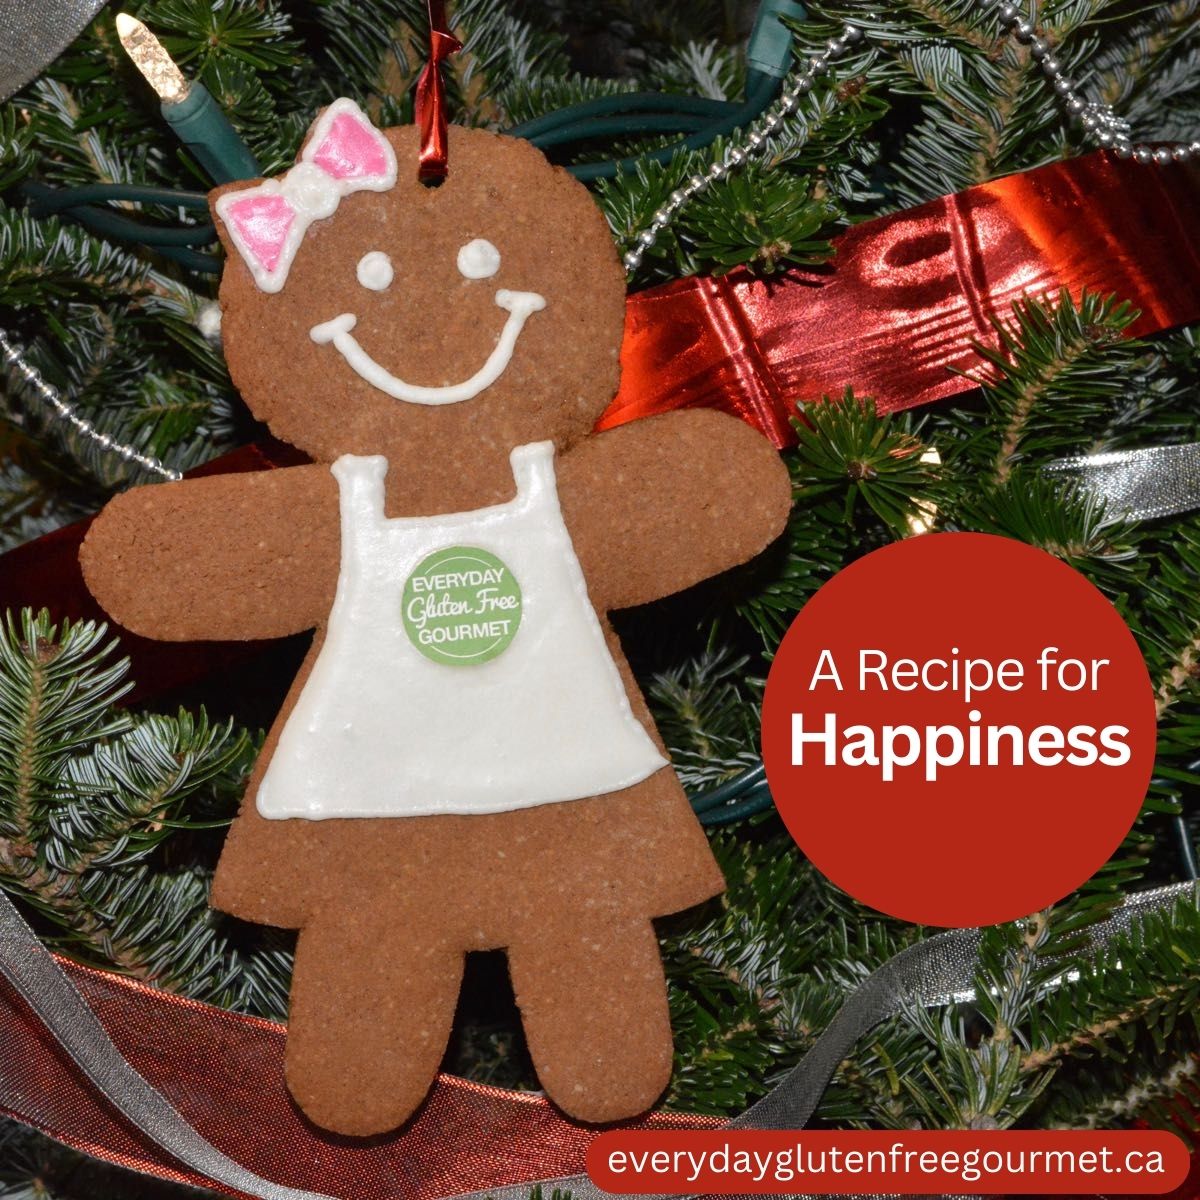 A gingerbread lady wearing a white apron with the Everyday Gluten Free Gourmet logo, hanging on a Christmas tree.